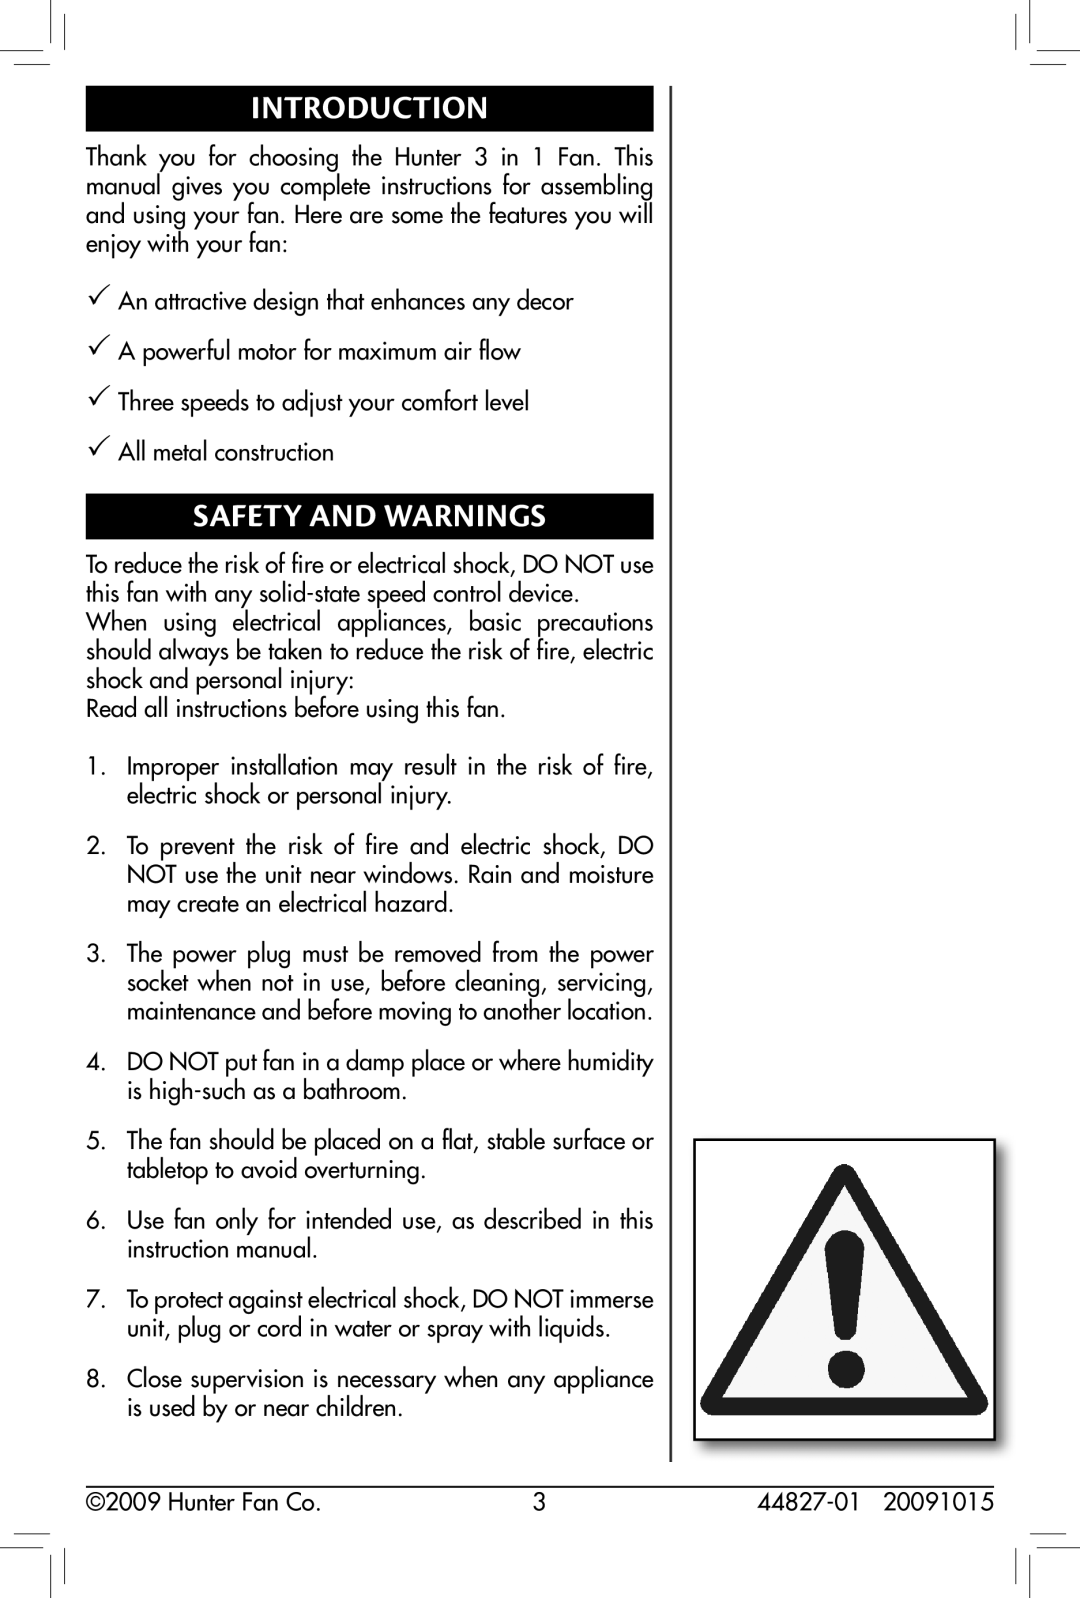 Hunter Fan 44827-01, 90405, 20091015 owner manual Introduction, Safety and Warnings 